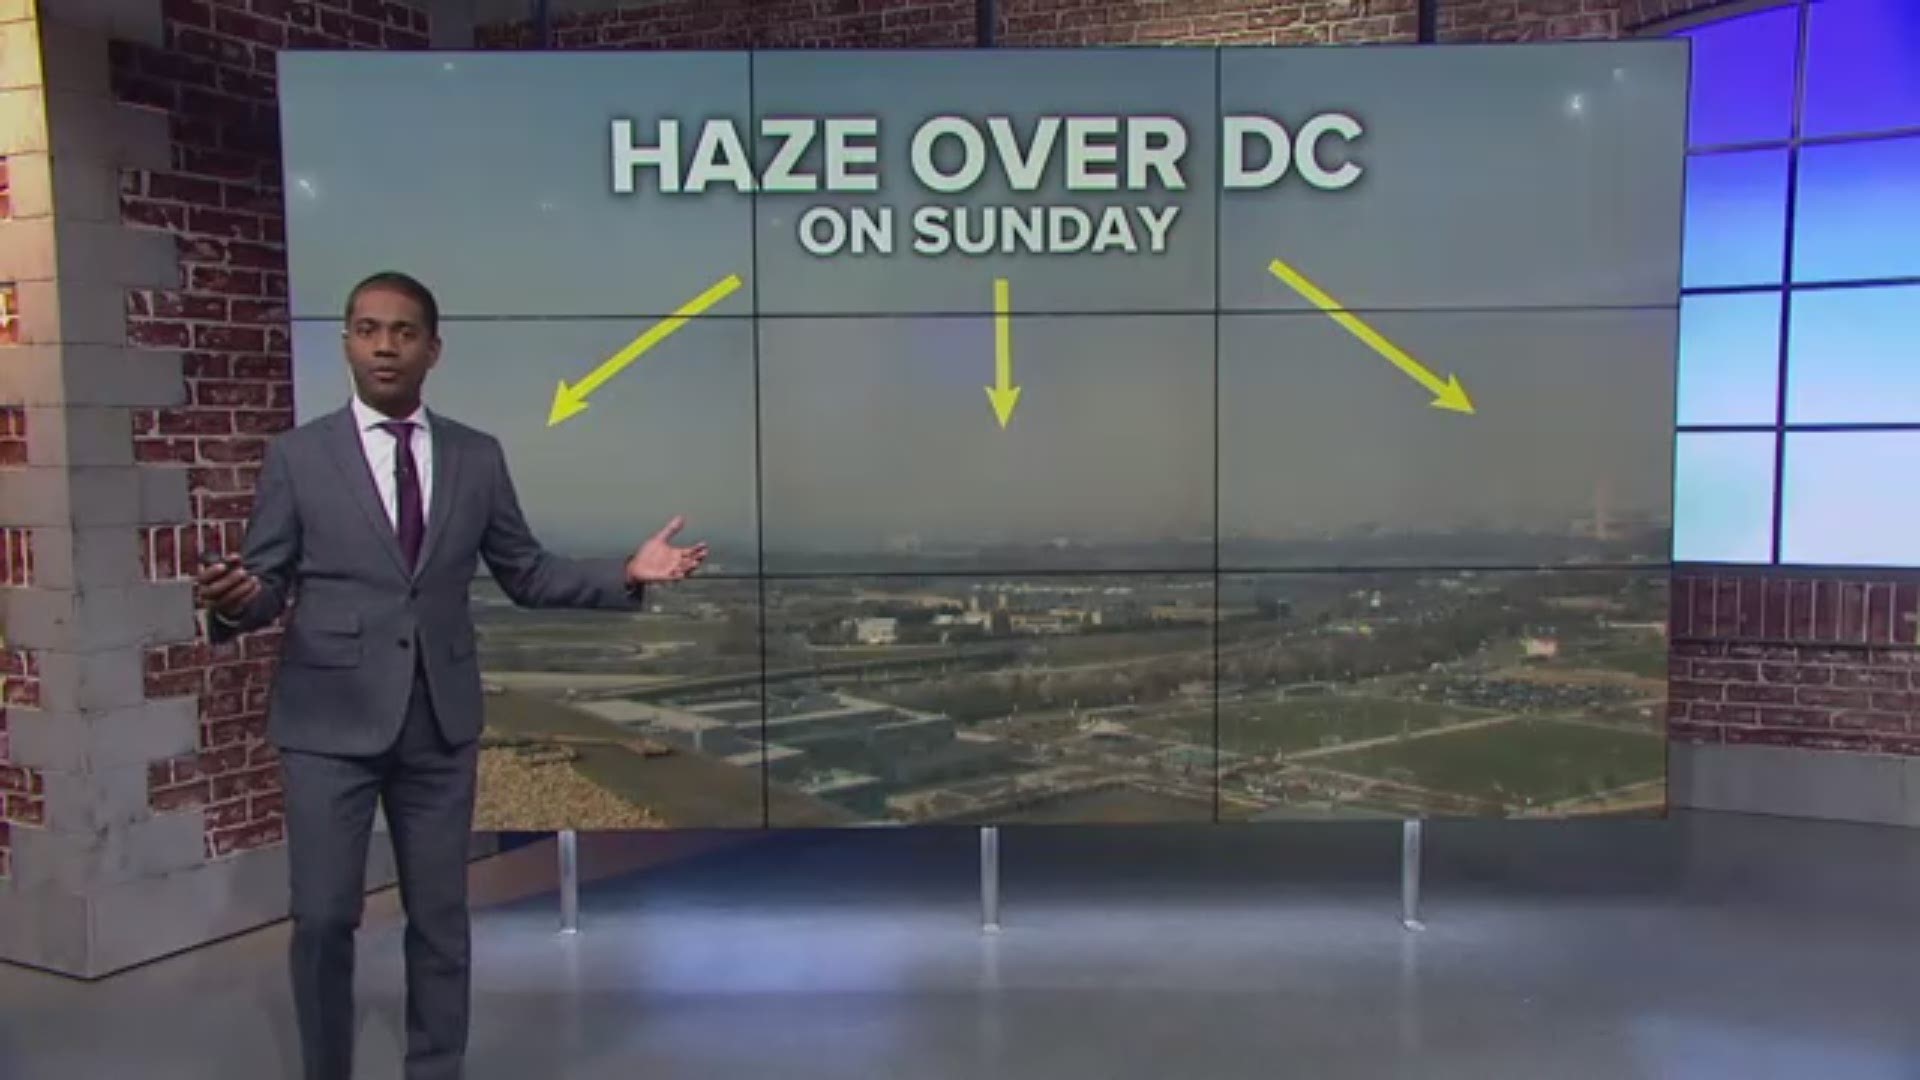 Did you notice the haze over DMV skies on Sunday?